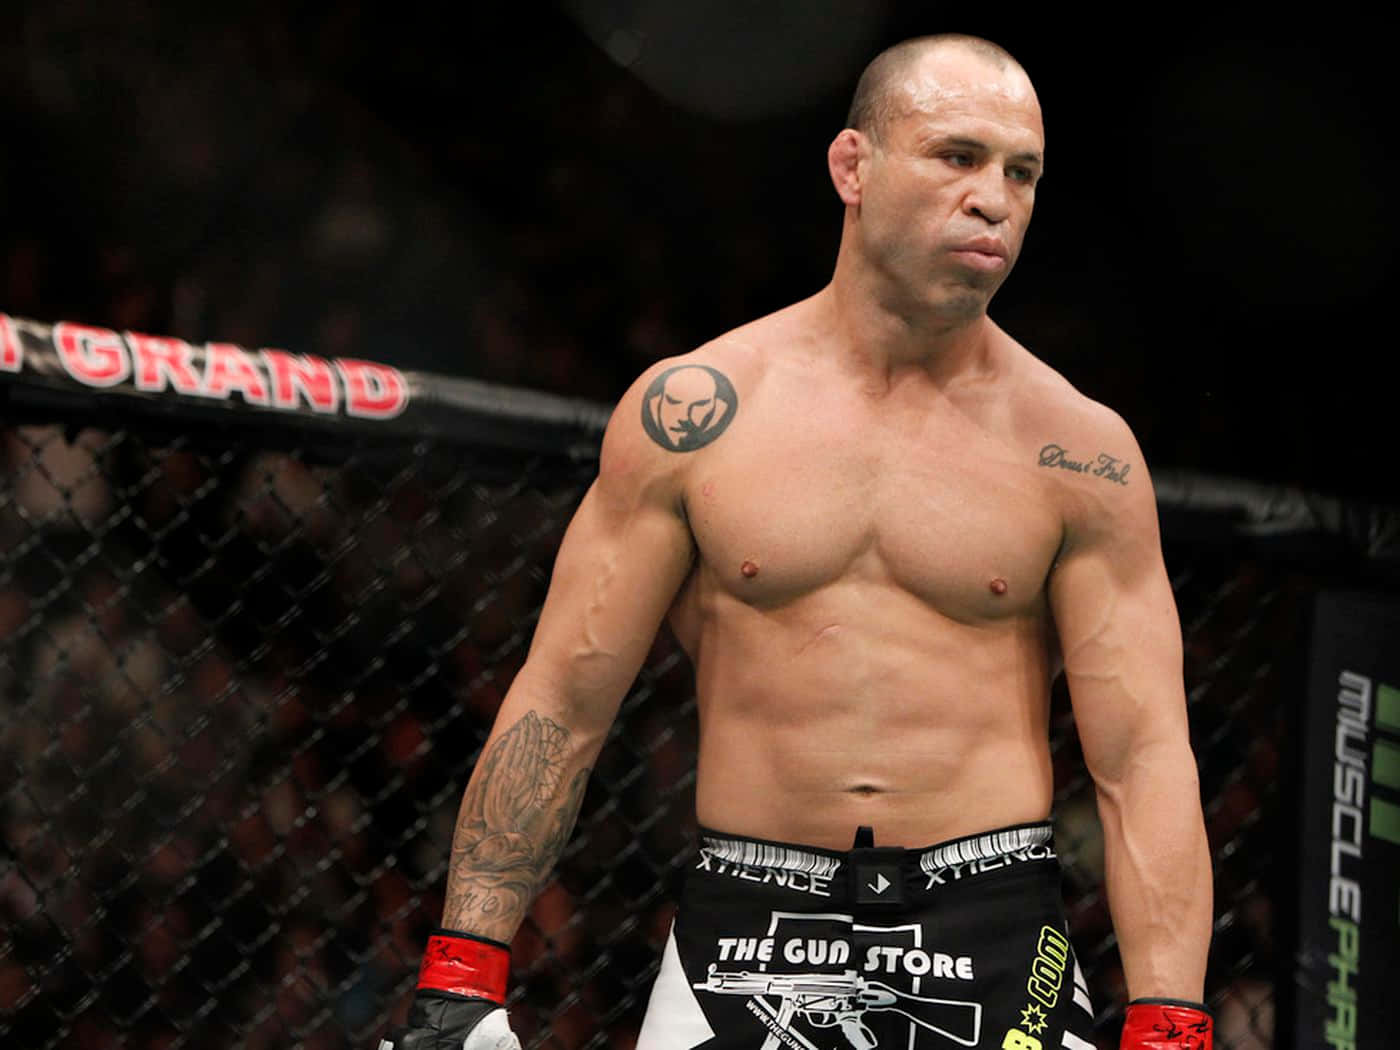 Wanderlei Silva In One Of His Matches Background